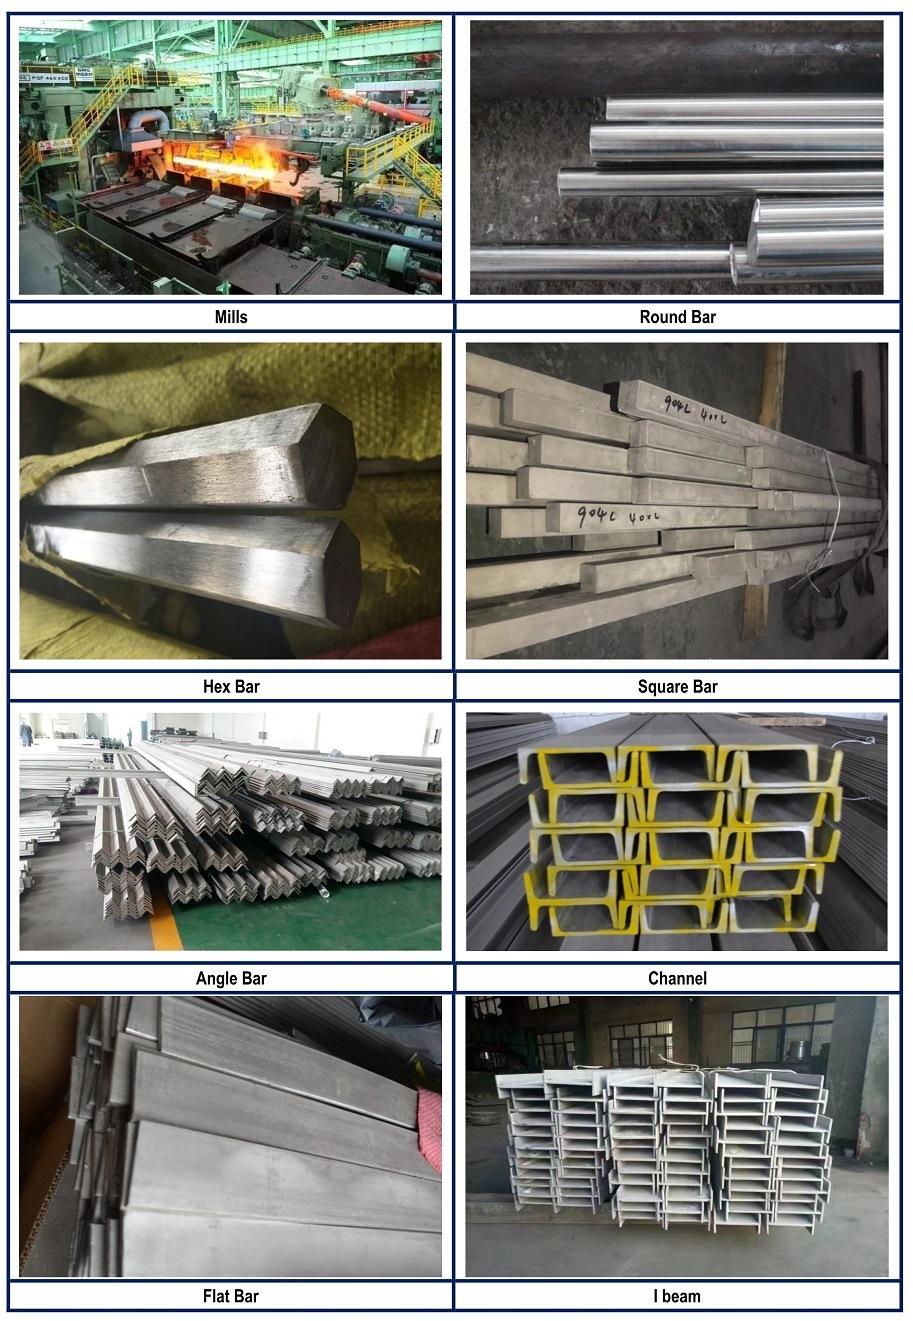 304 316 410 420 Stainless Steel Bar Price